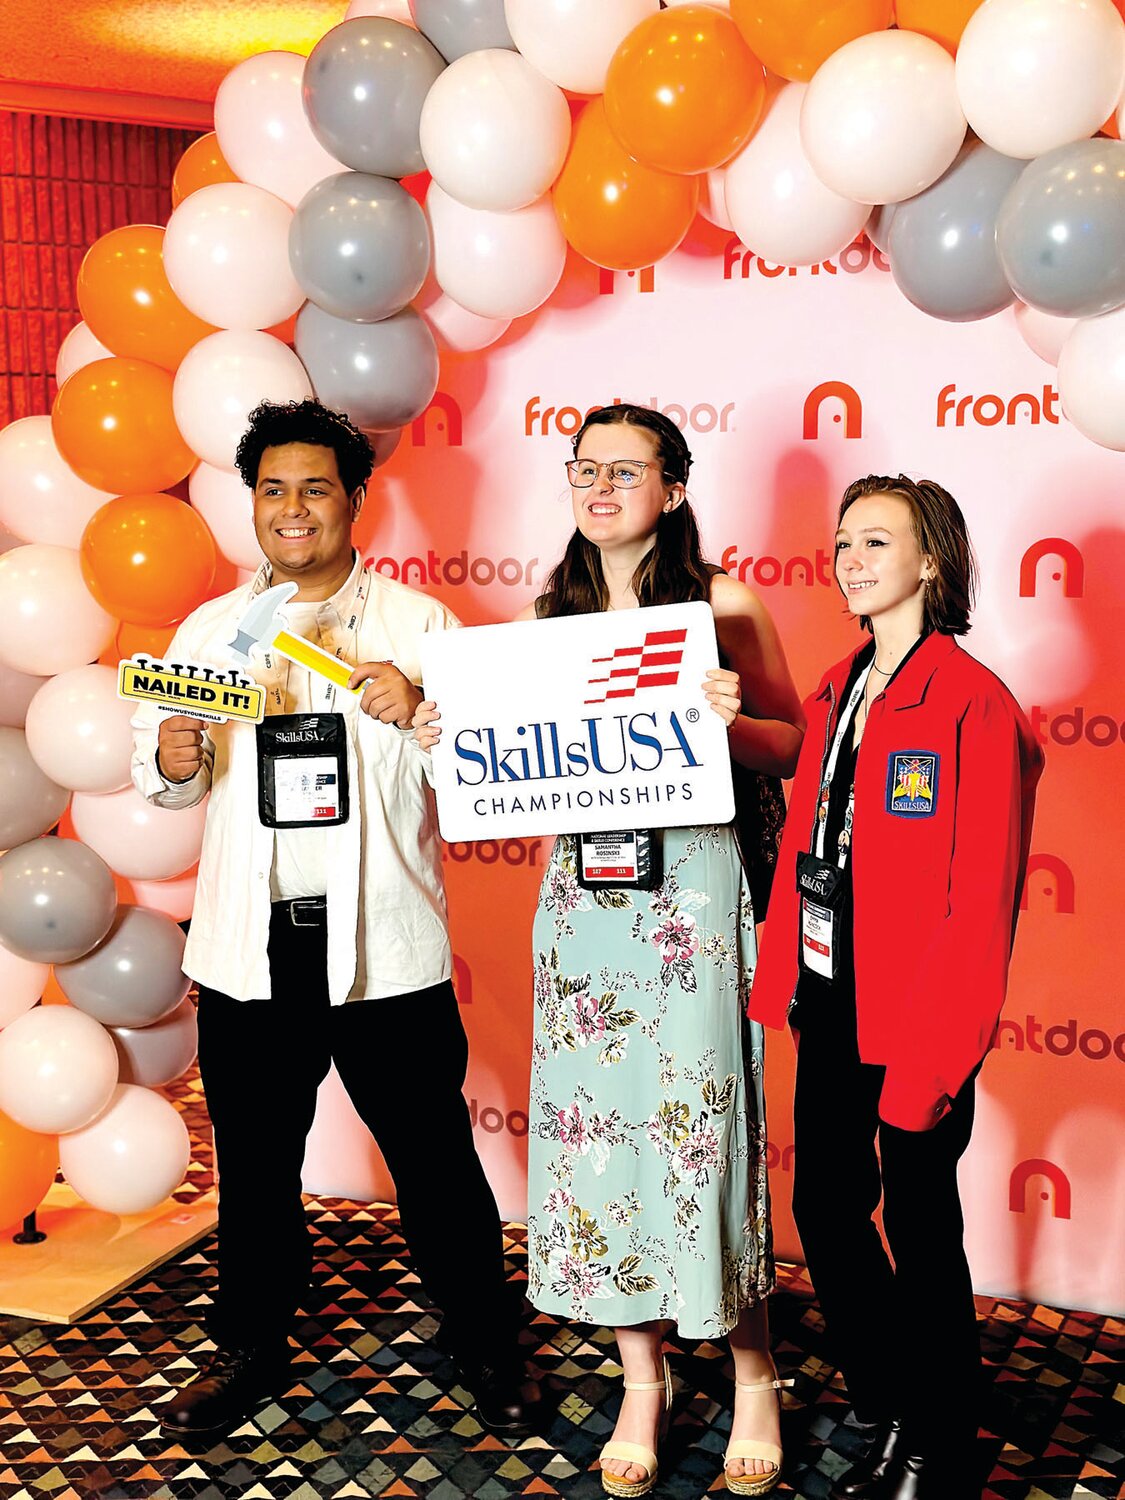 Middle Bucks Institute of Technology student Alexander Lopez, Samantha Rosinski and Emma Hancock, filling in for Christian Pearson, at the SkillsUSA National Competitions.